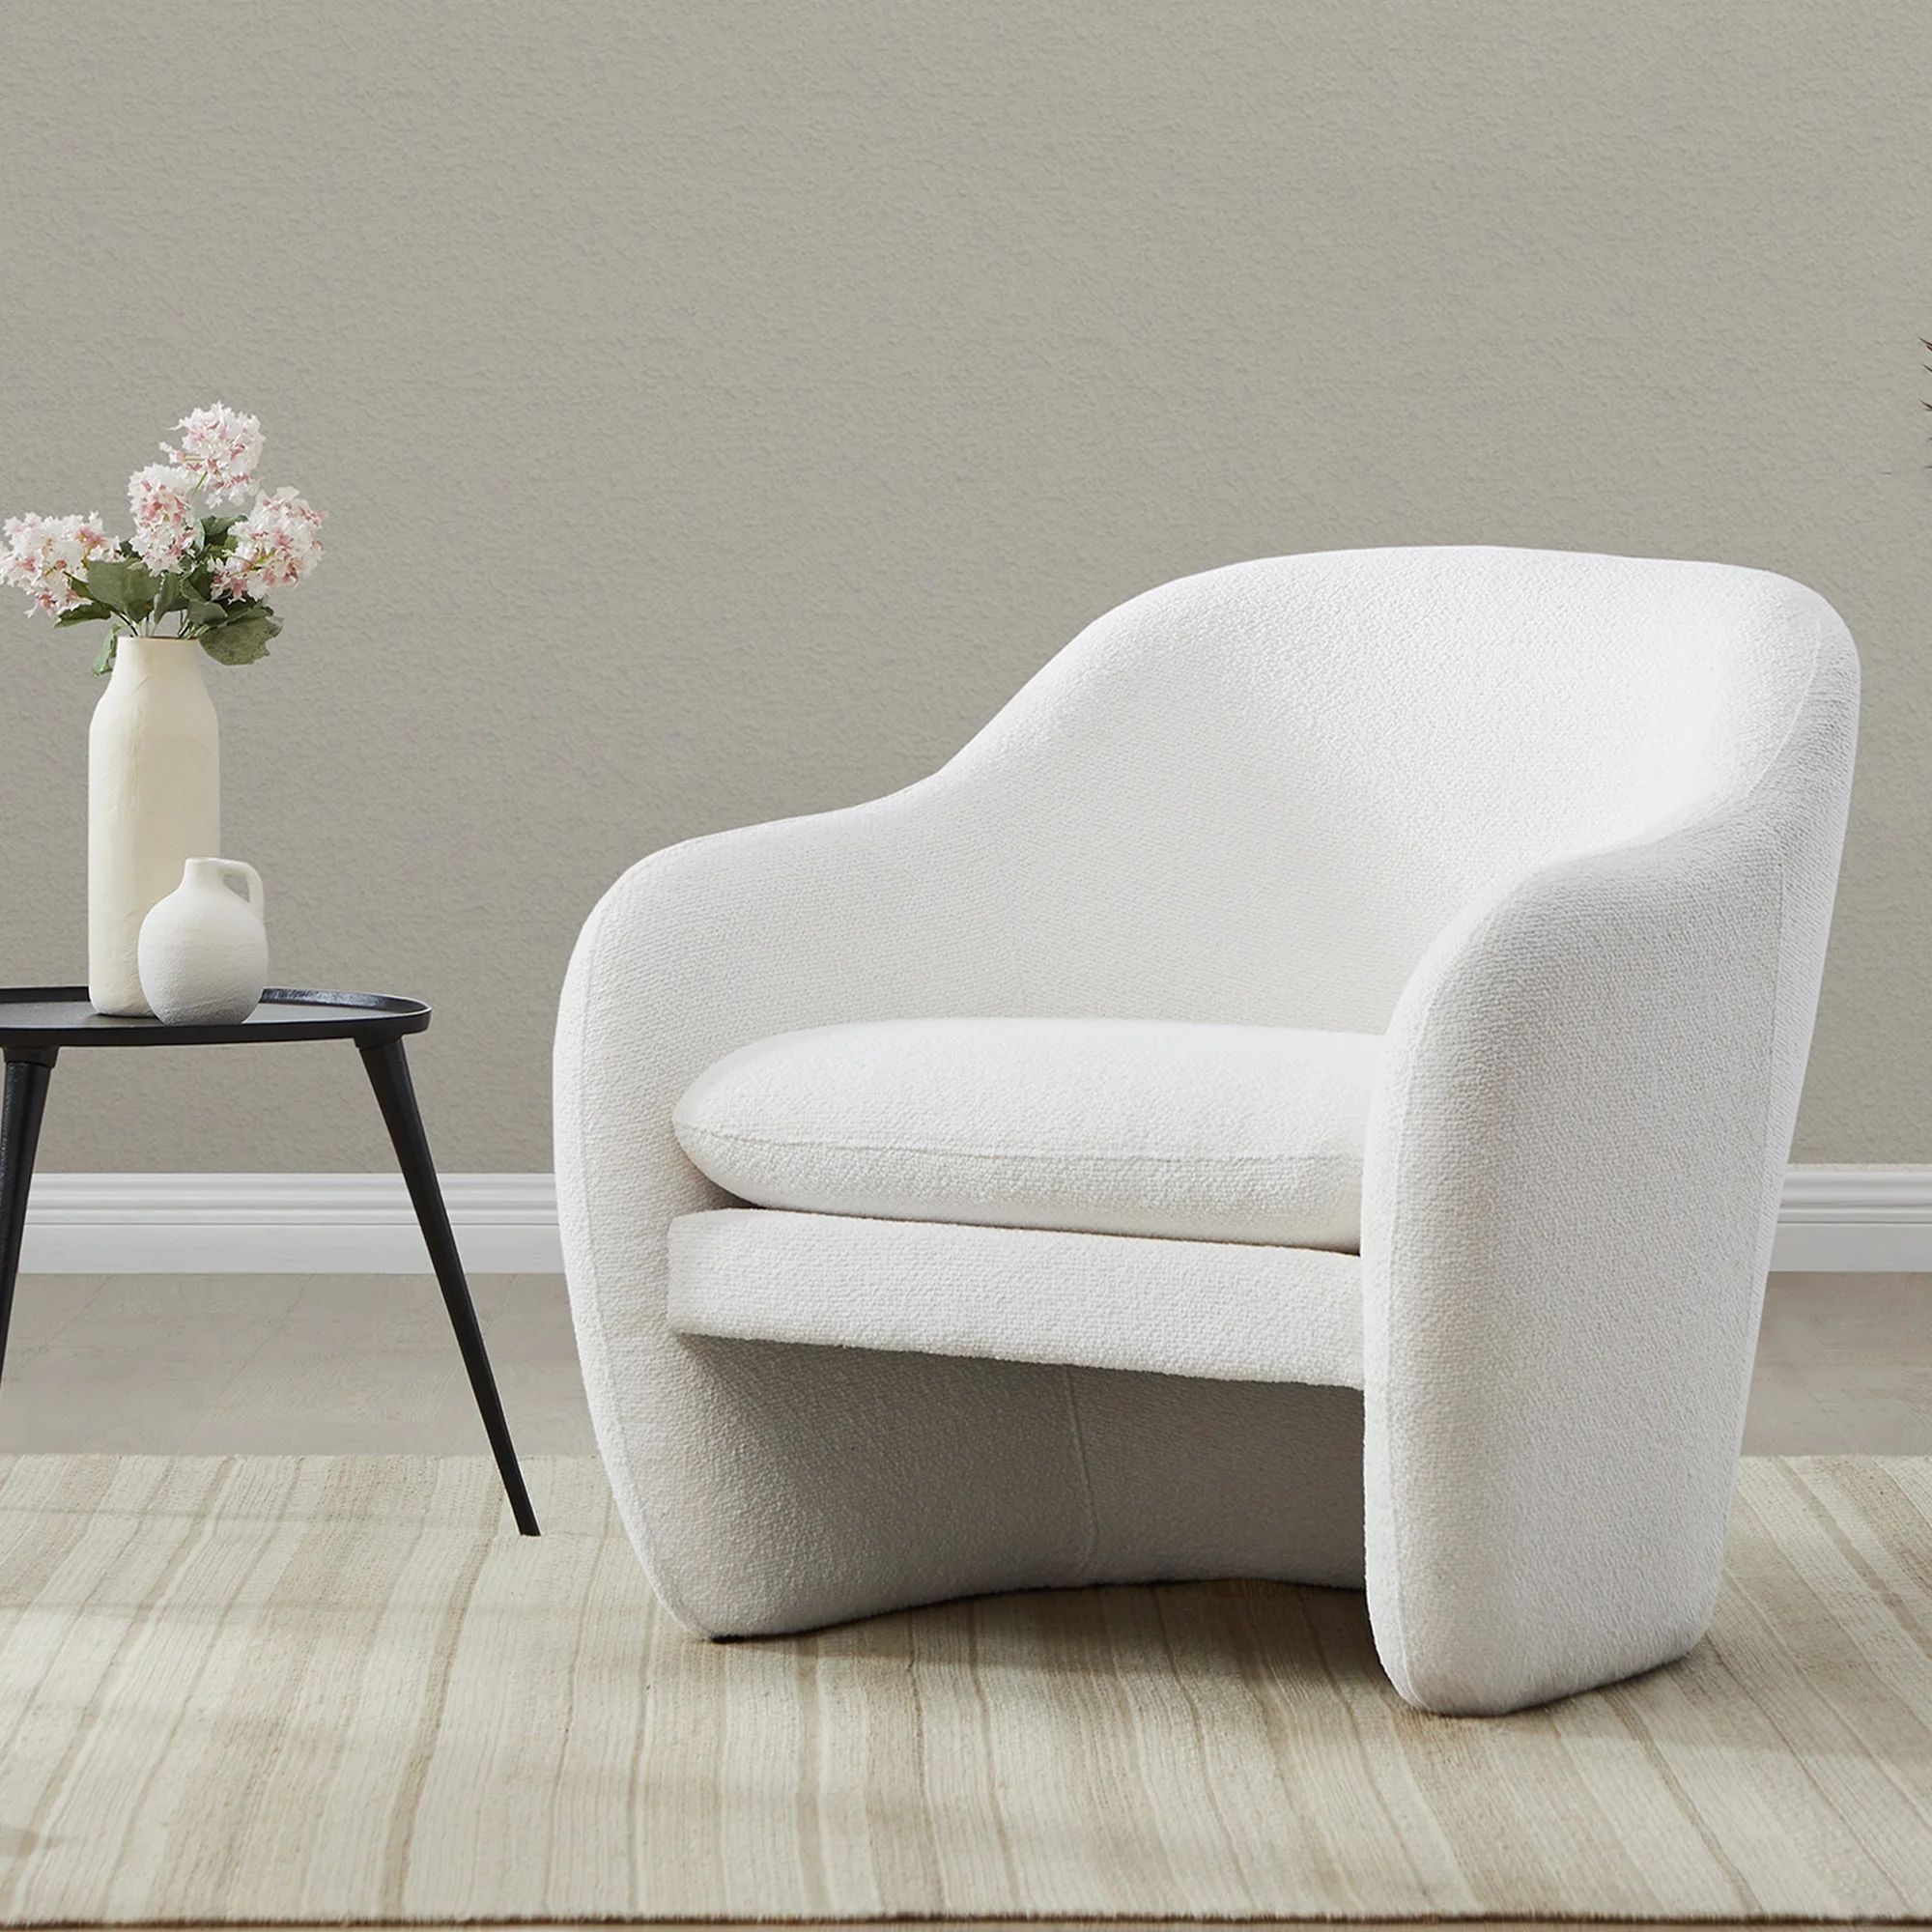 CHITA Modern Accent Chair, Boucle Arm Chair Lounge Chair for Living Room Bedroom, White - Walmart... | Walmart (US)